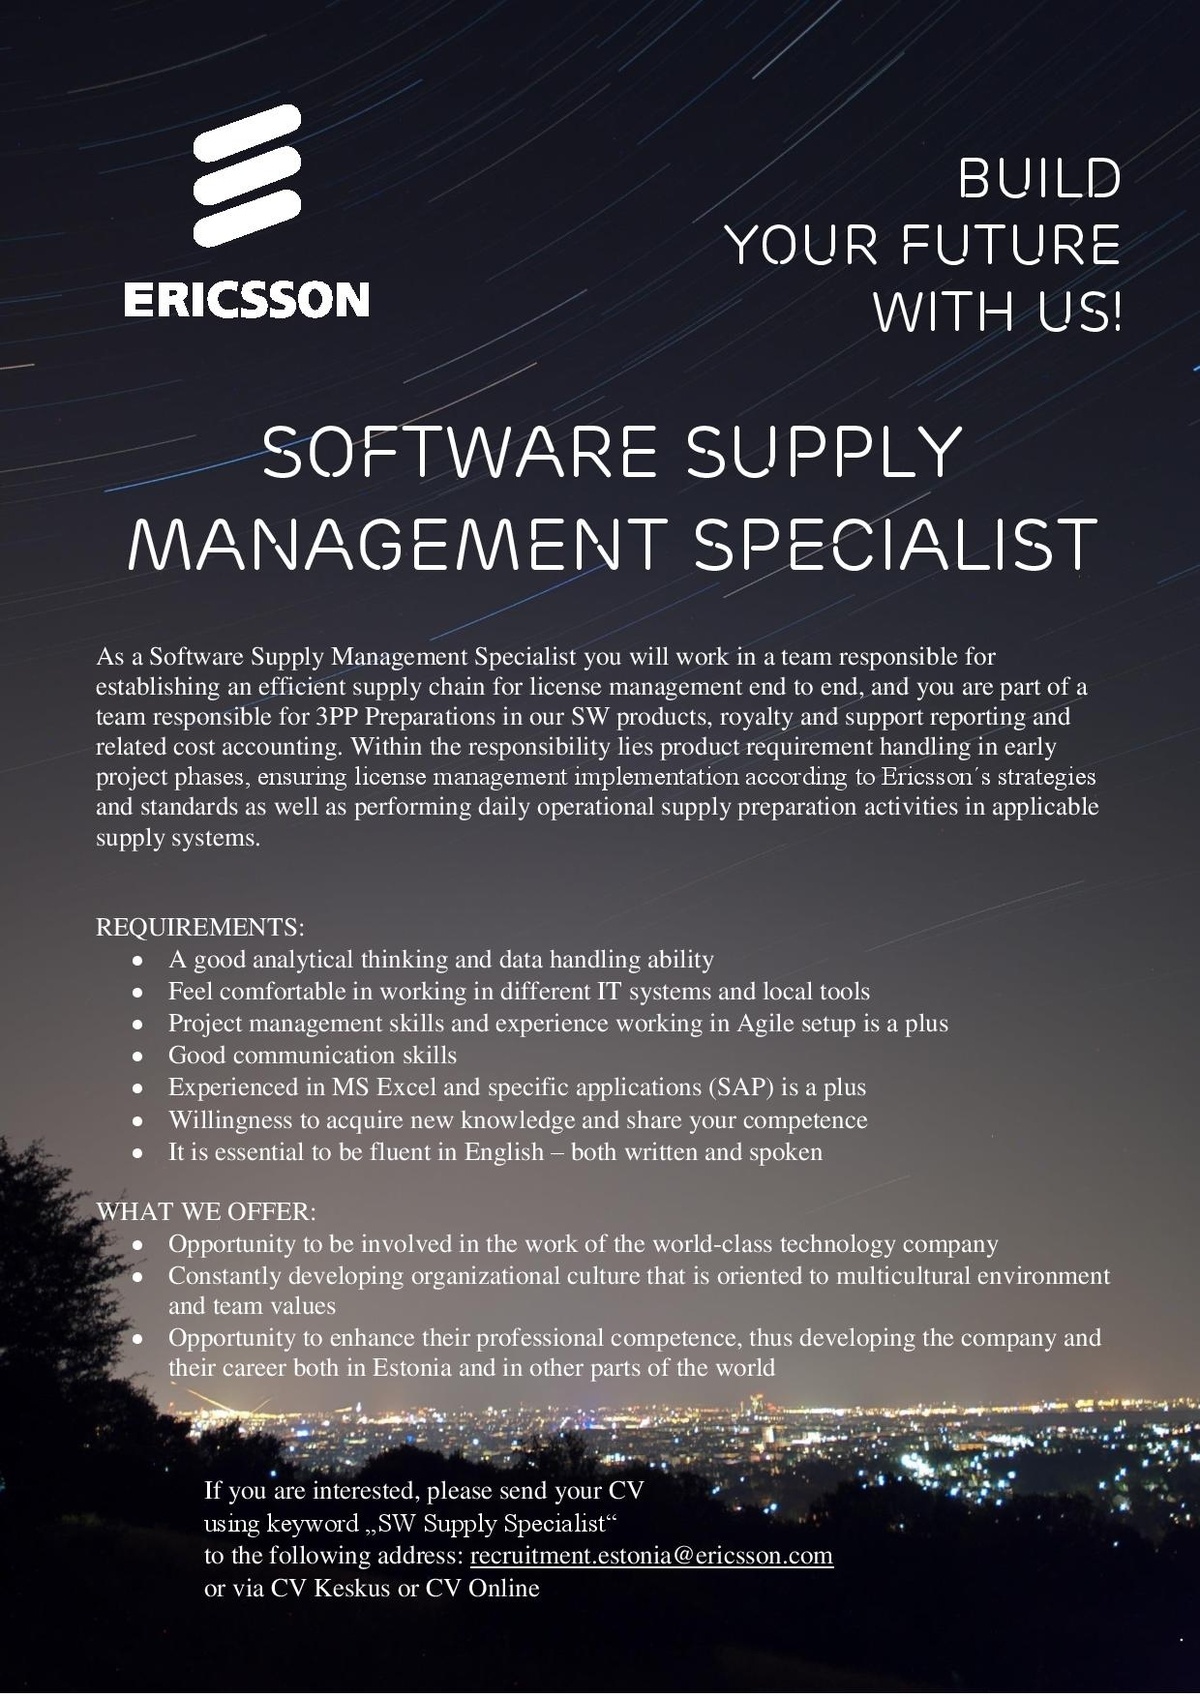 Ericsson Eesti AS Software Supply Management Specialist